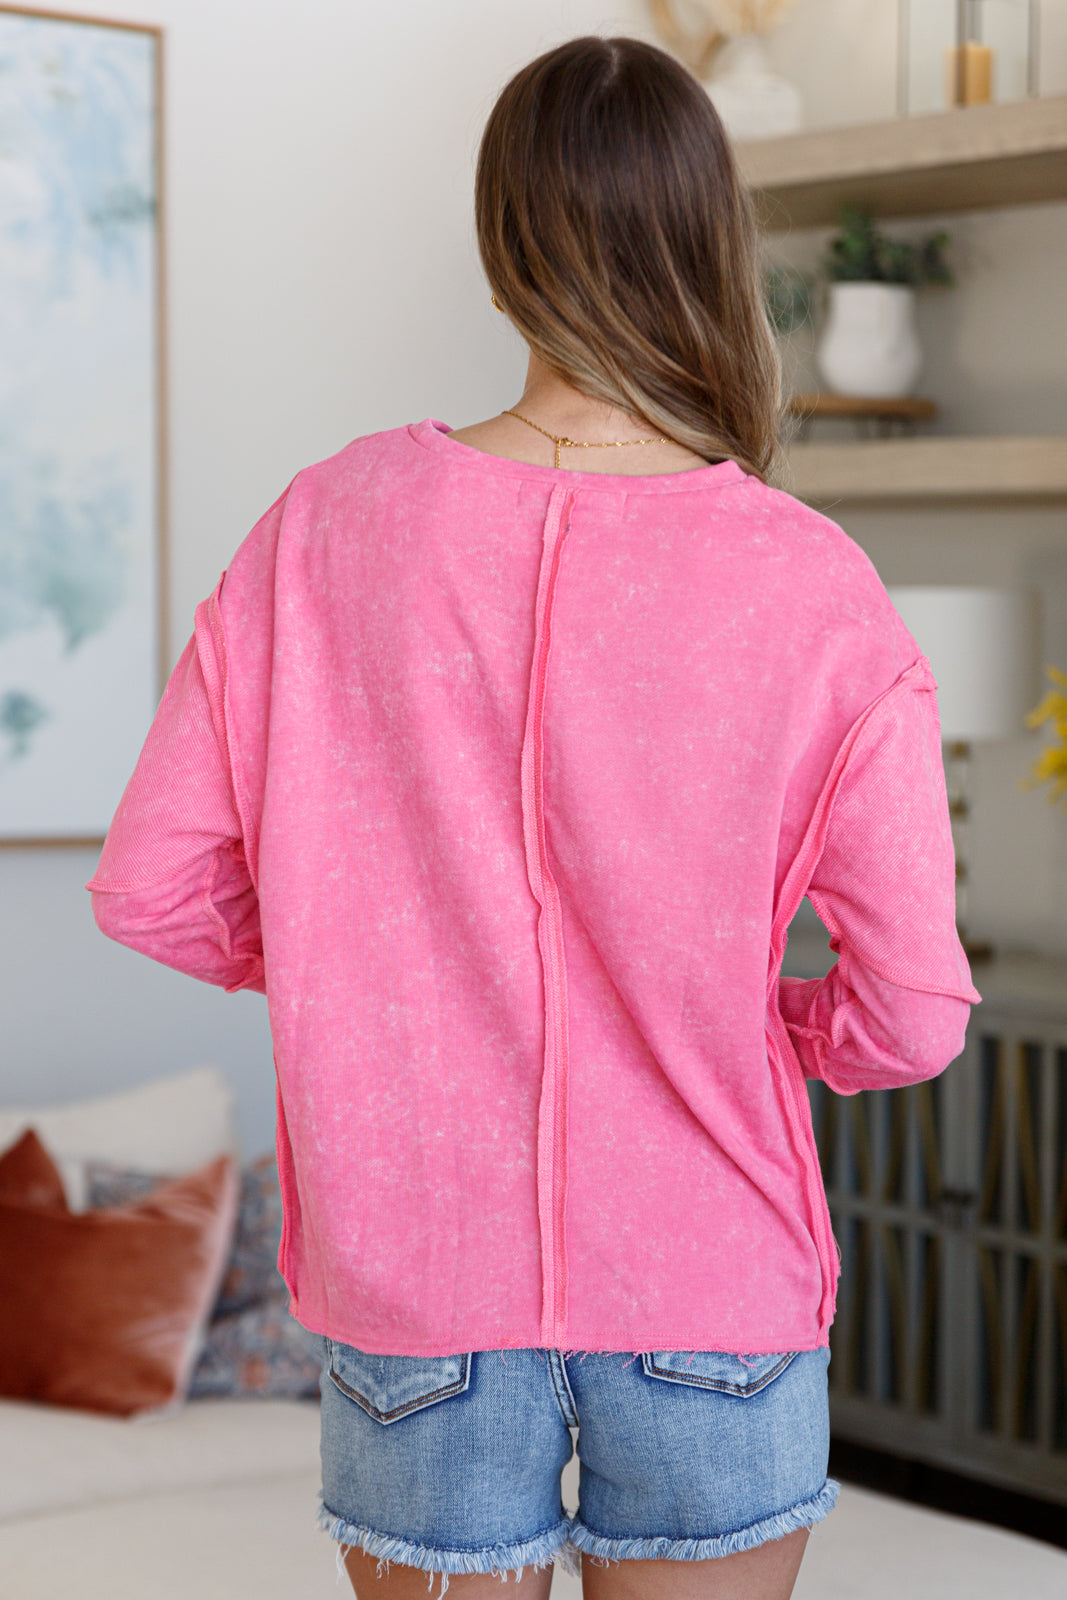 This Patchwork Long Sleeve Sweatshirt is a stylish must-have for those chilly days ahead! With soft Terri Cloth fabric this sweatshirt promises max-all-day comfort.